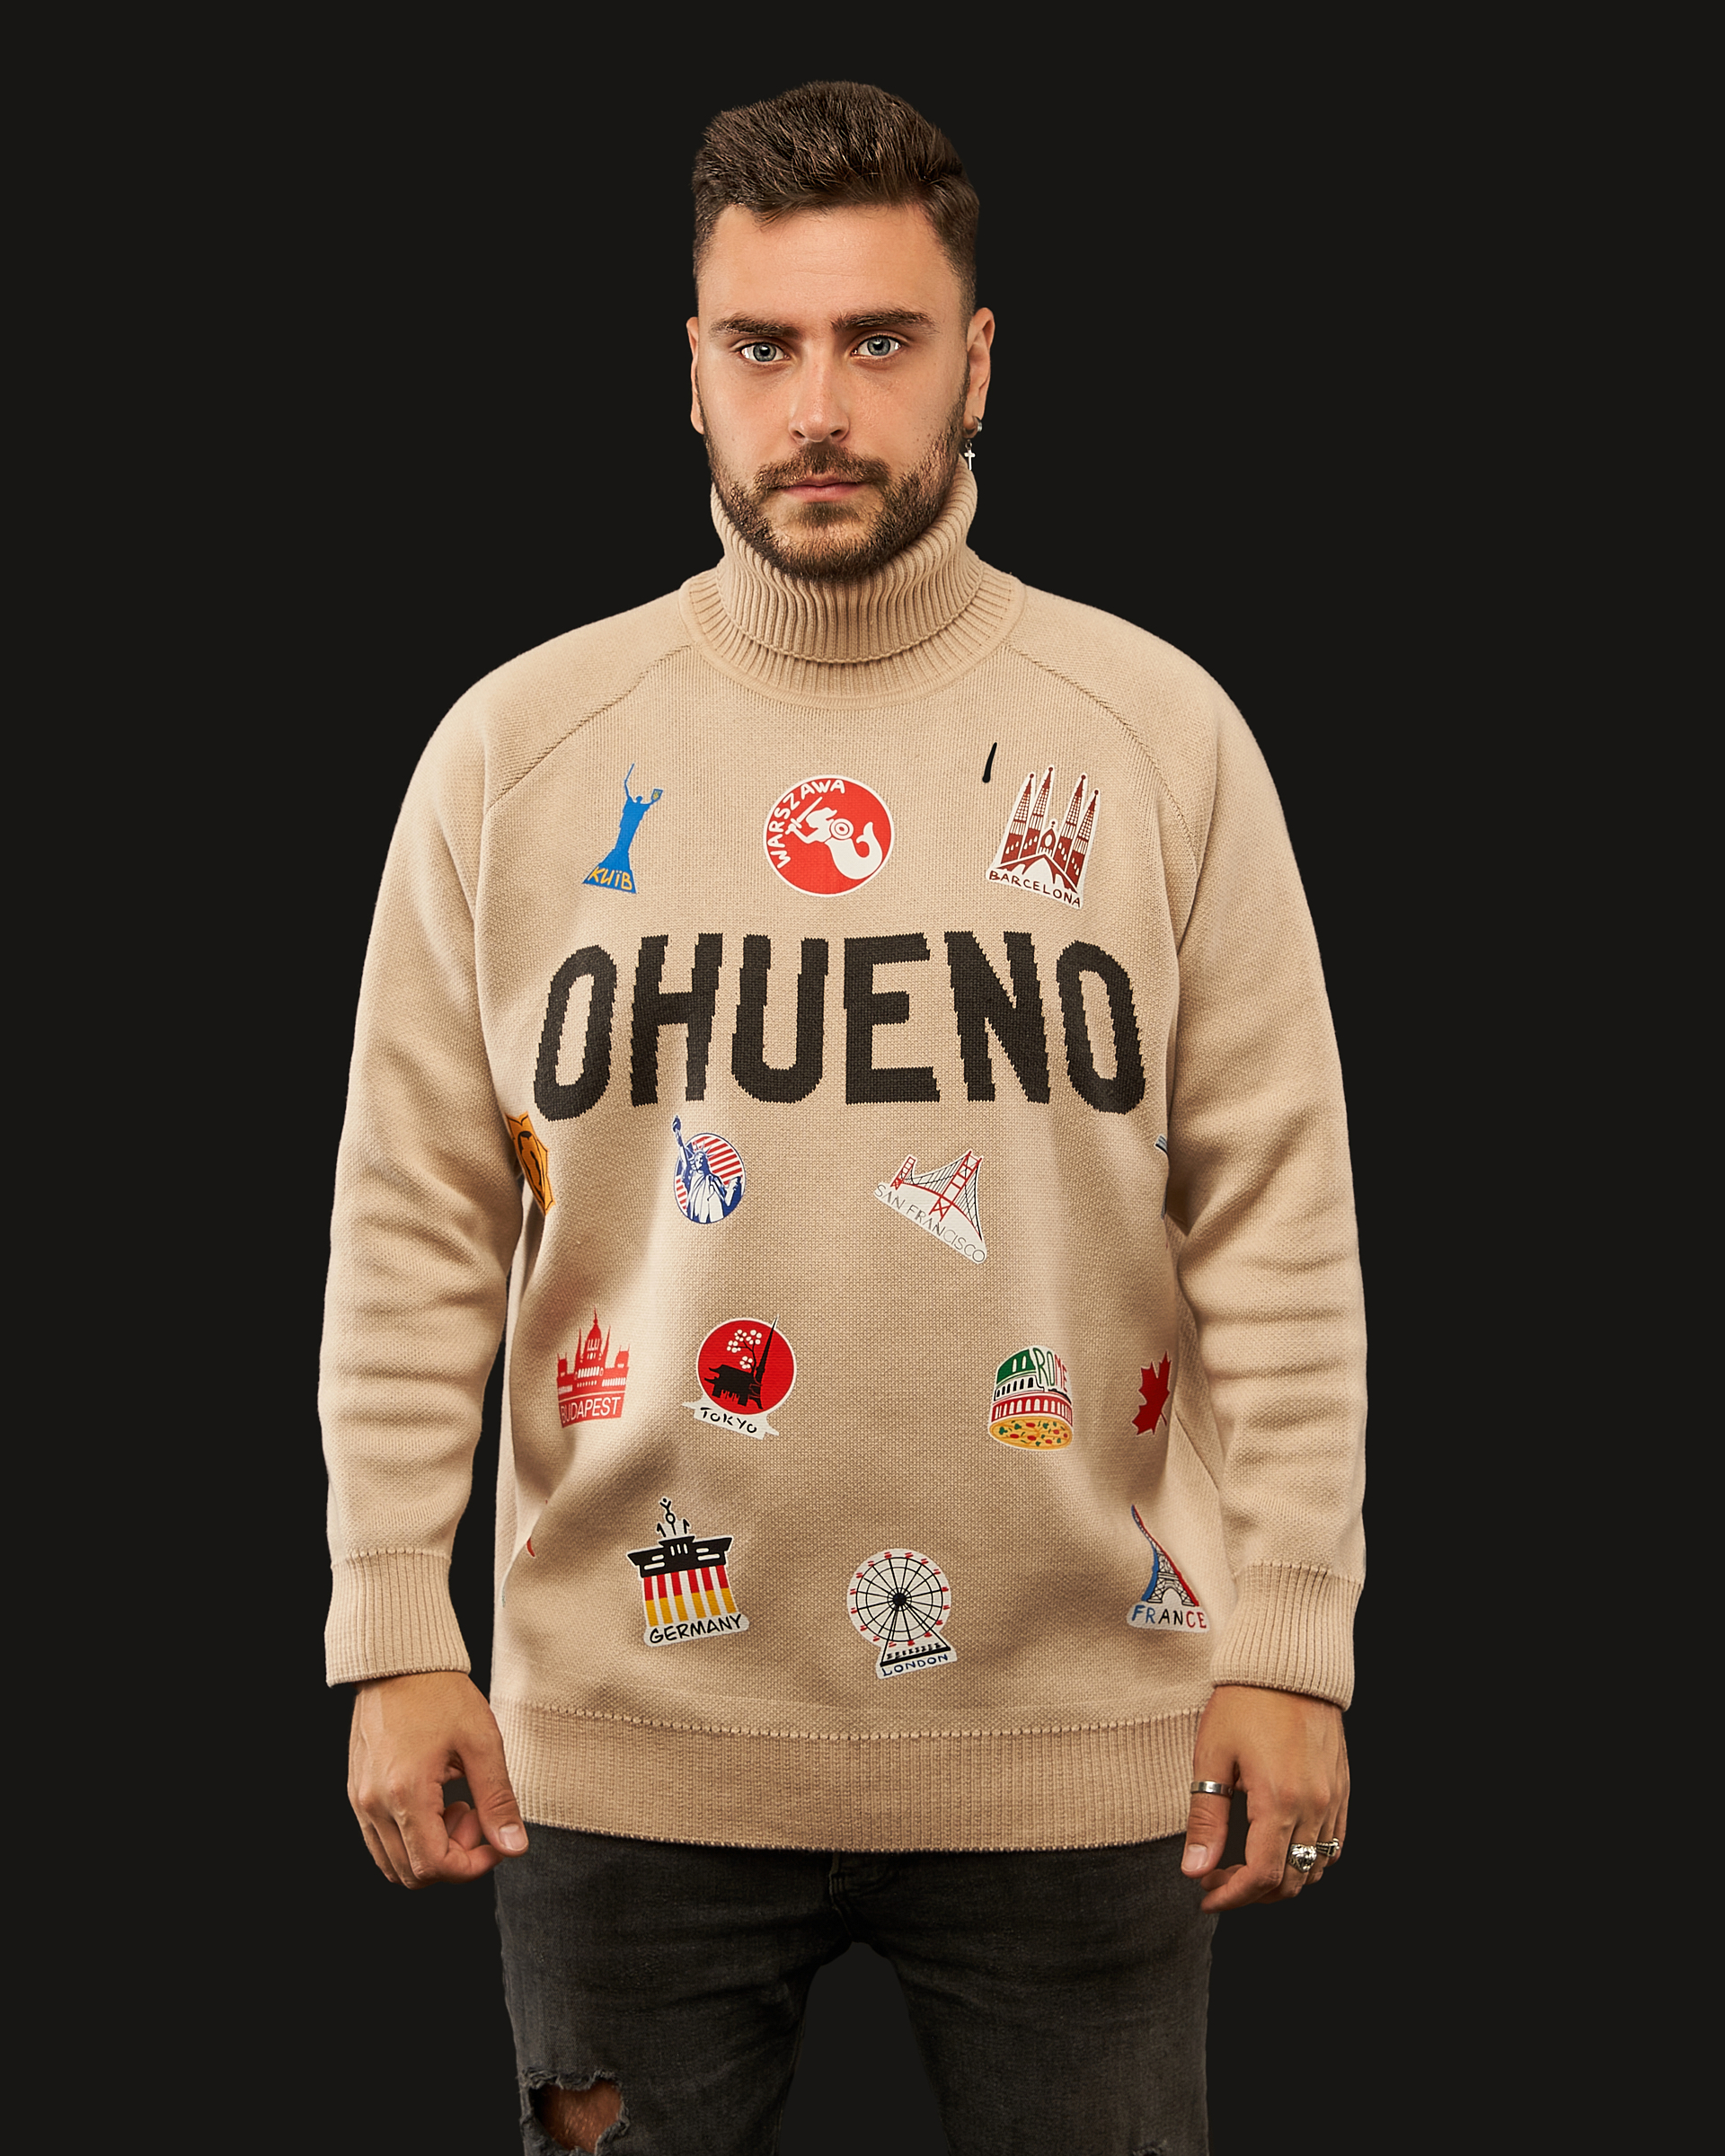 Sweter (beżowy) Image: https://ohueno-official.com/wp-content/uploads/m01948-1.jpg